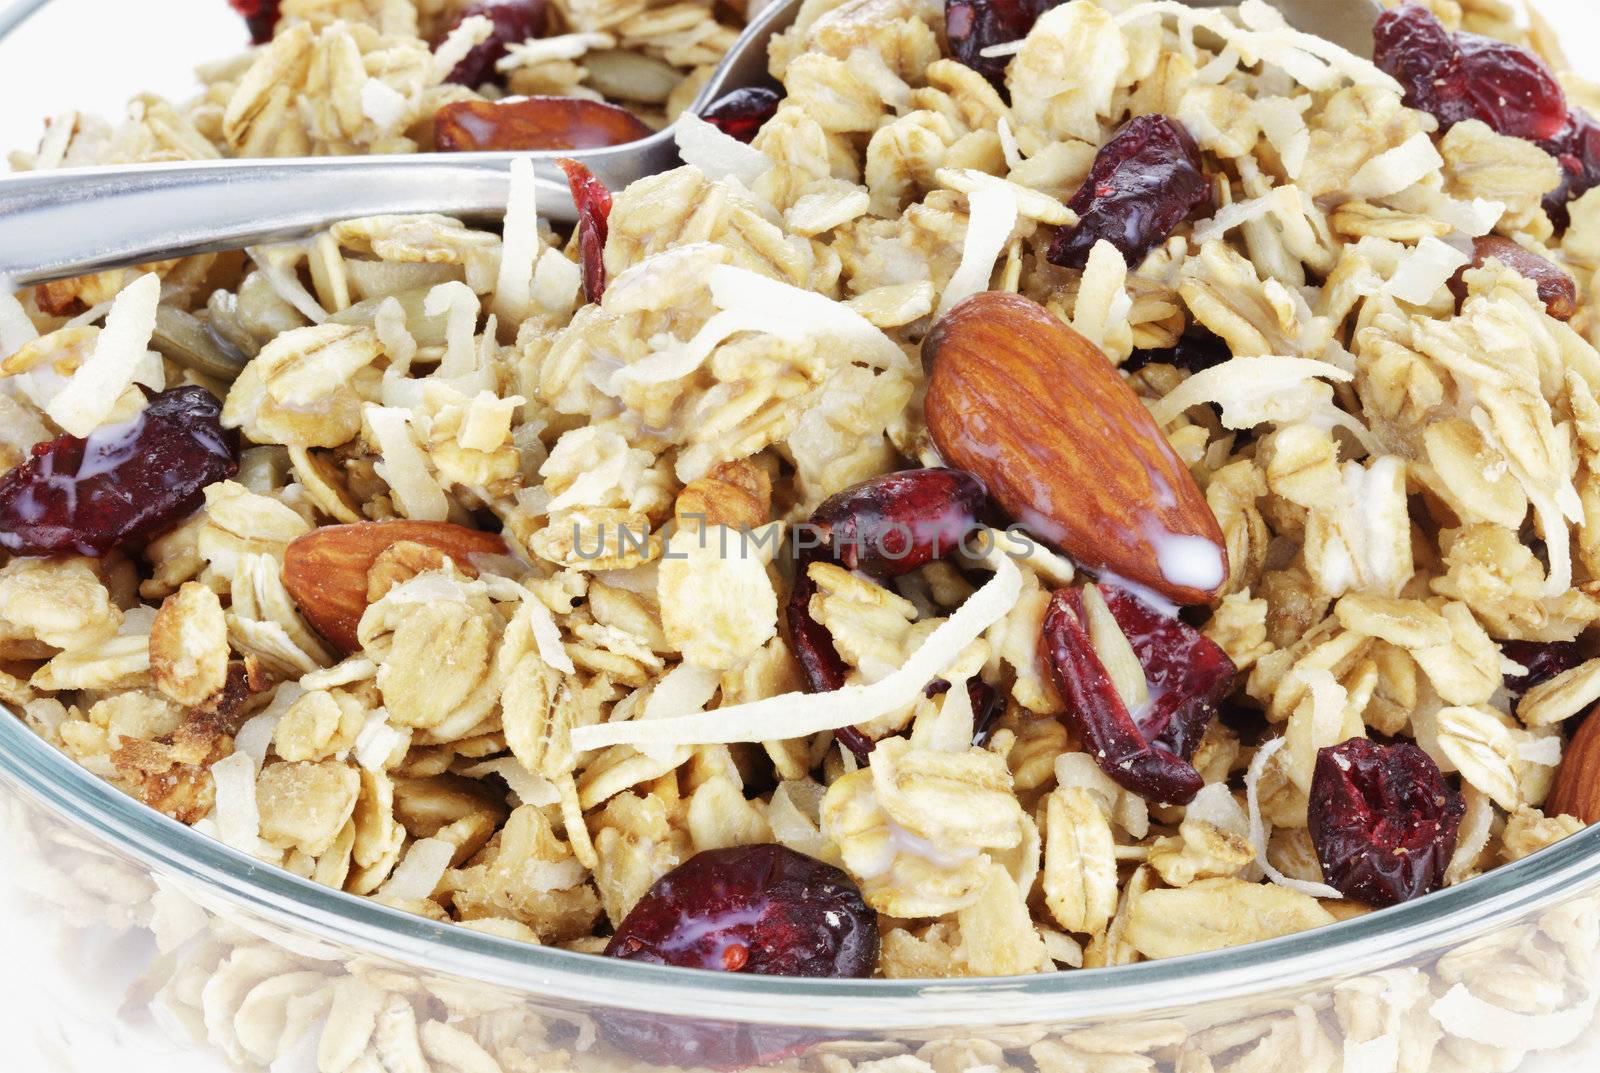 Granola with almonds, dried cranberries and coconut.
